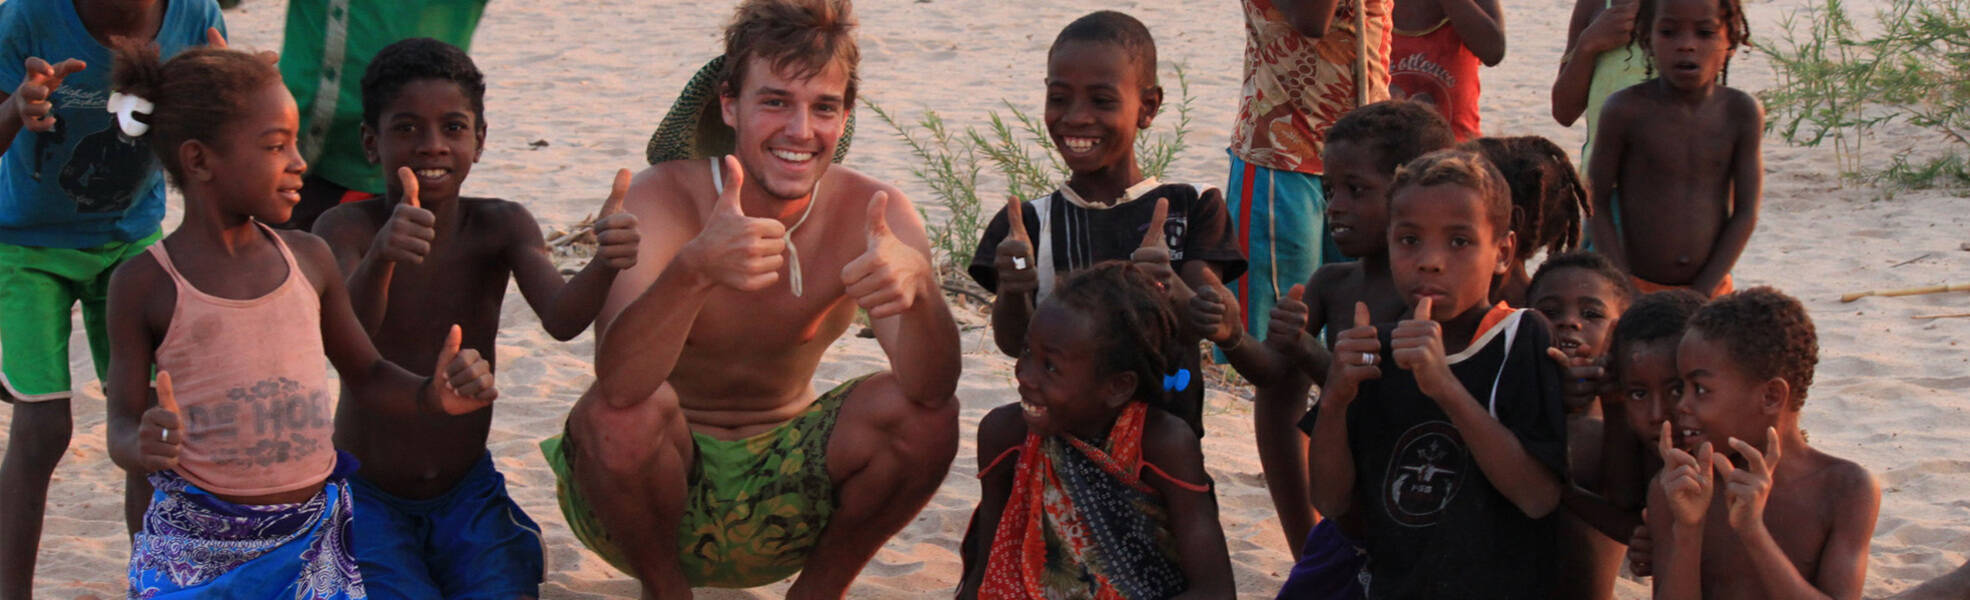 Internship abroad with children on the beach in South Africa